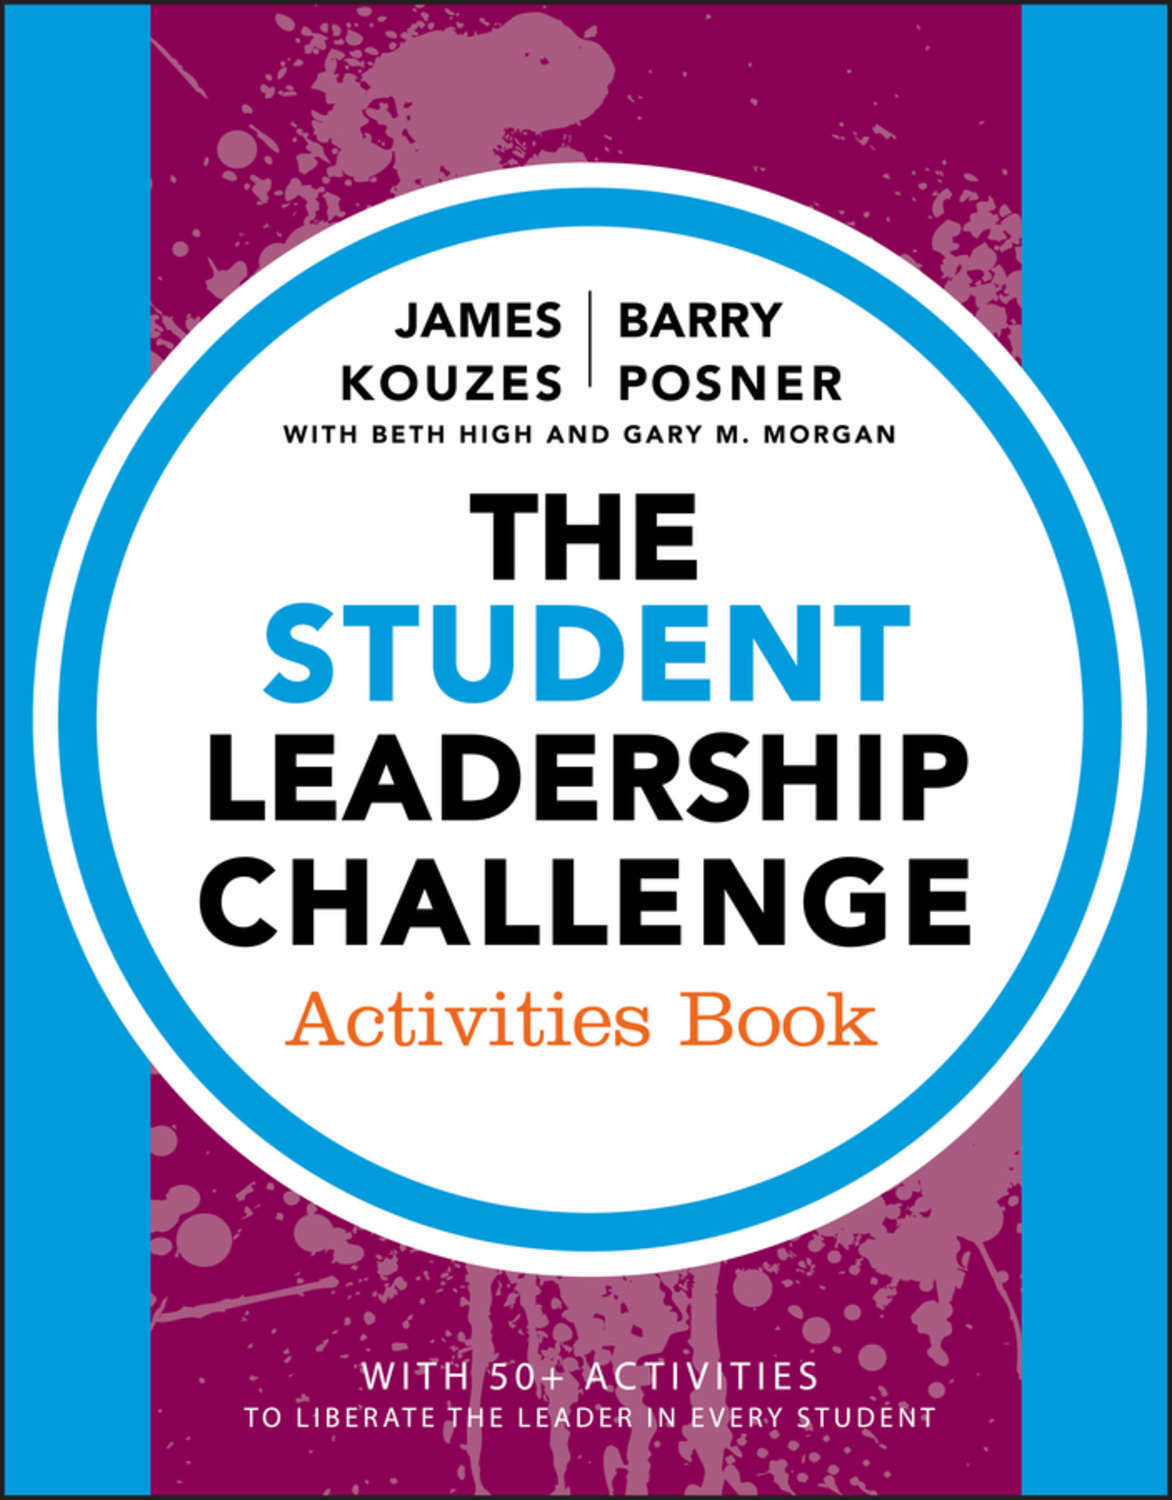 Empower student s book. The Leadership Challenge book. Challenging activities. Book the emotionally Intelligent leader. High with Beth.